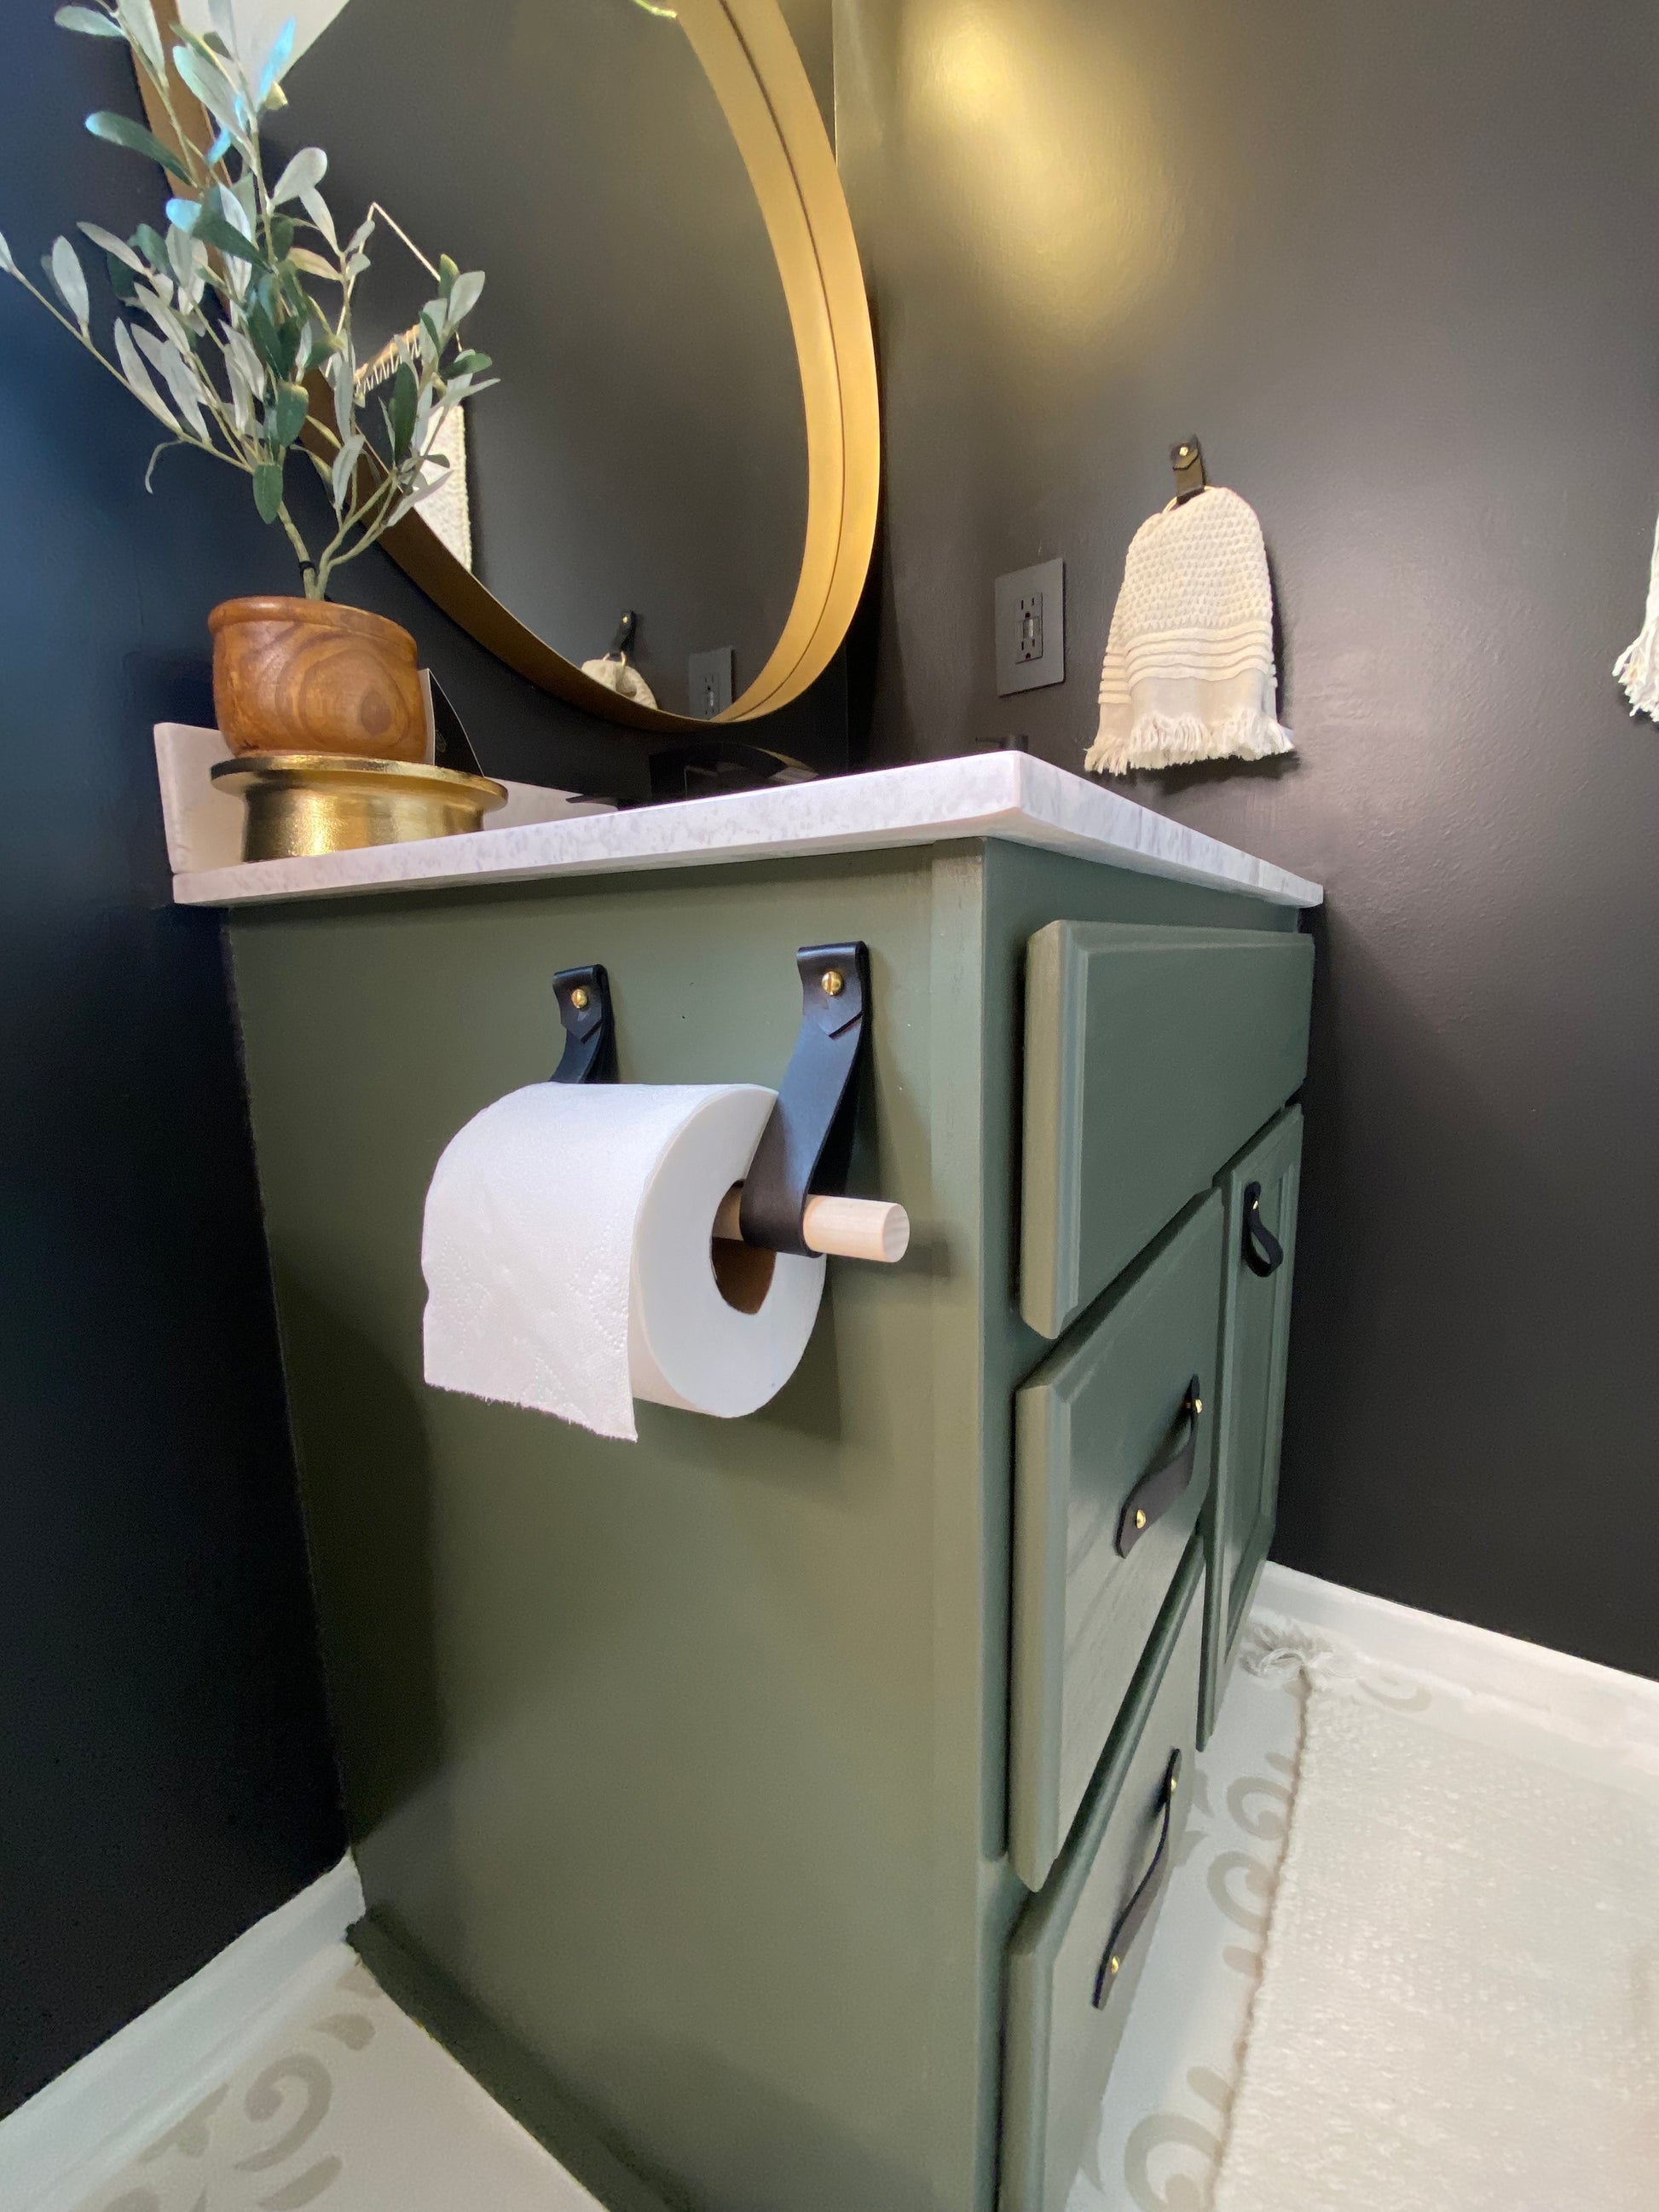 Where To Put The Toilet Paper Holder In A Small Bathroom